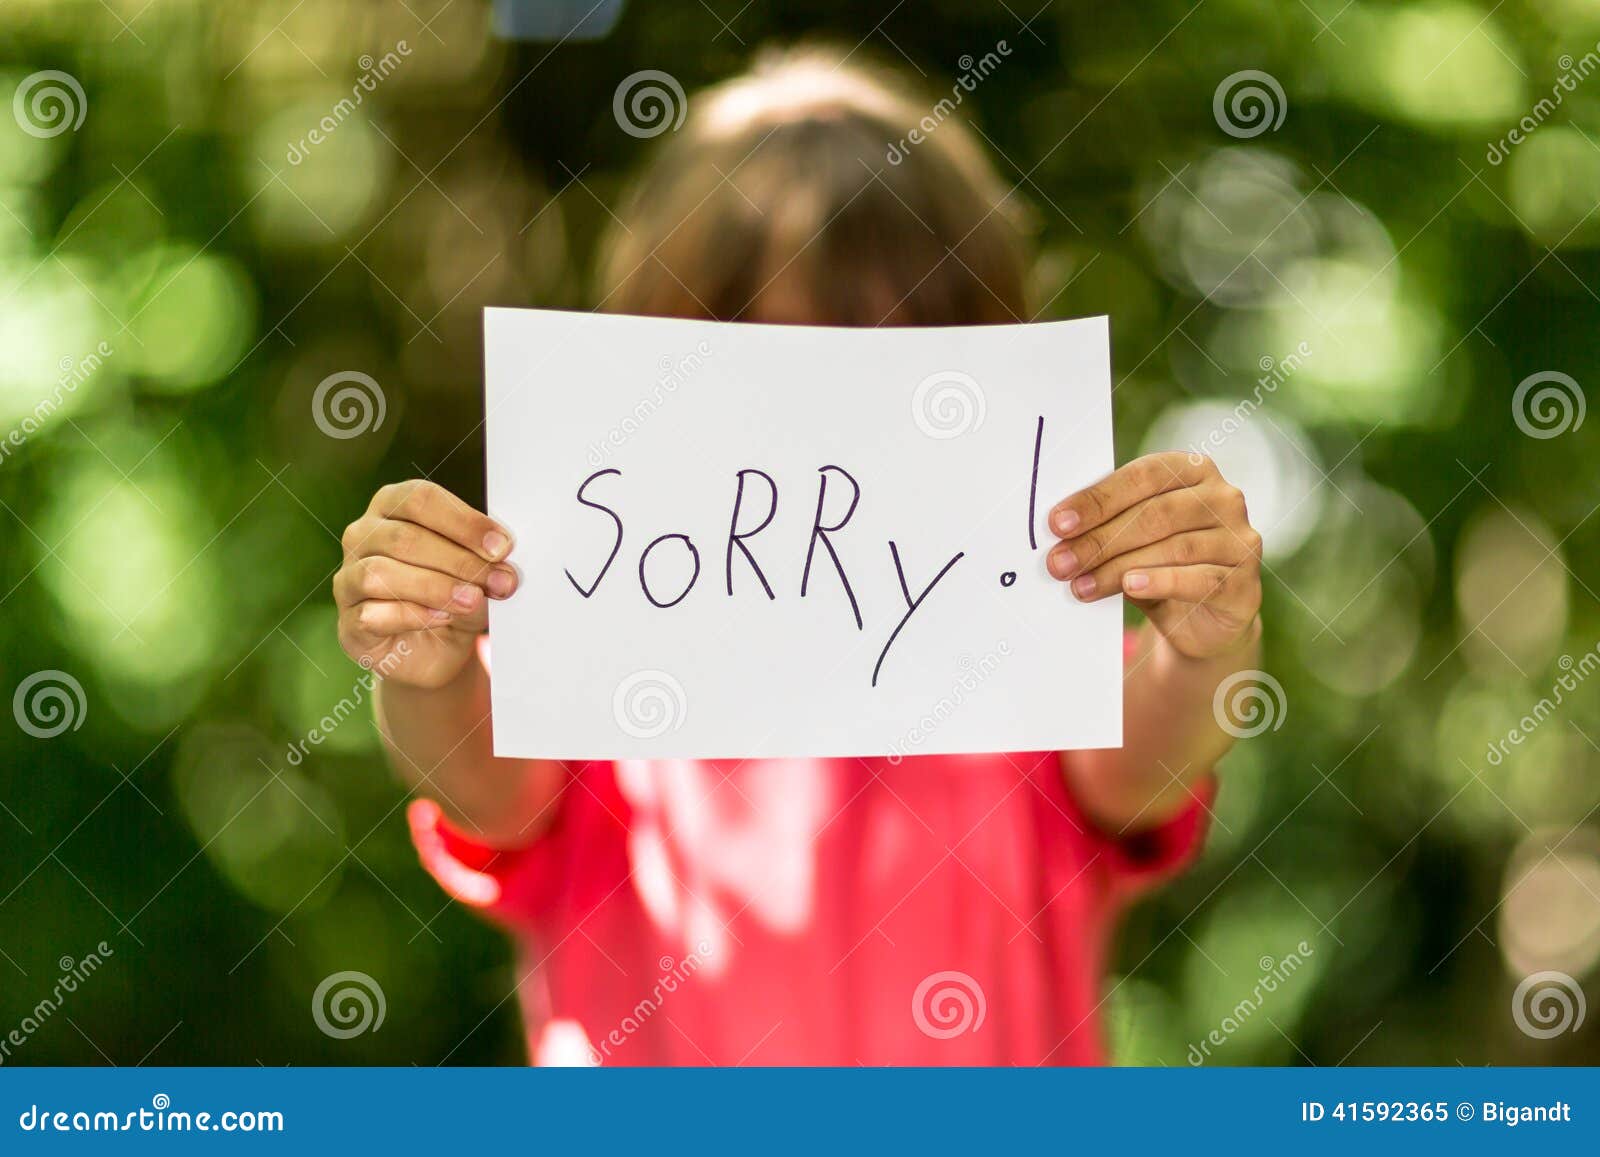 Girl with Sorry sign stock image. Image of anonymous - 41592365